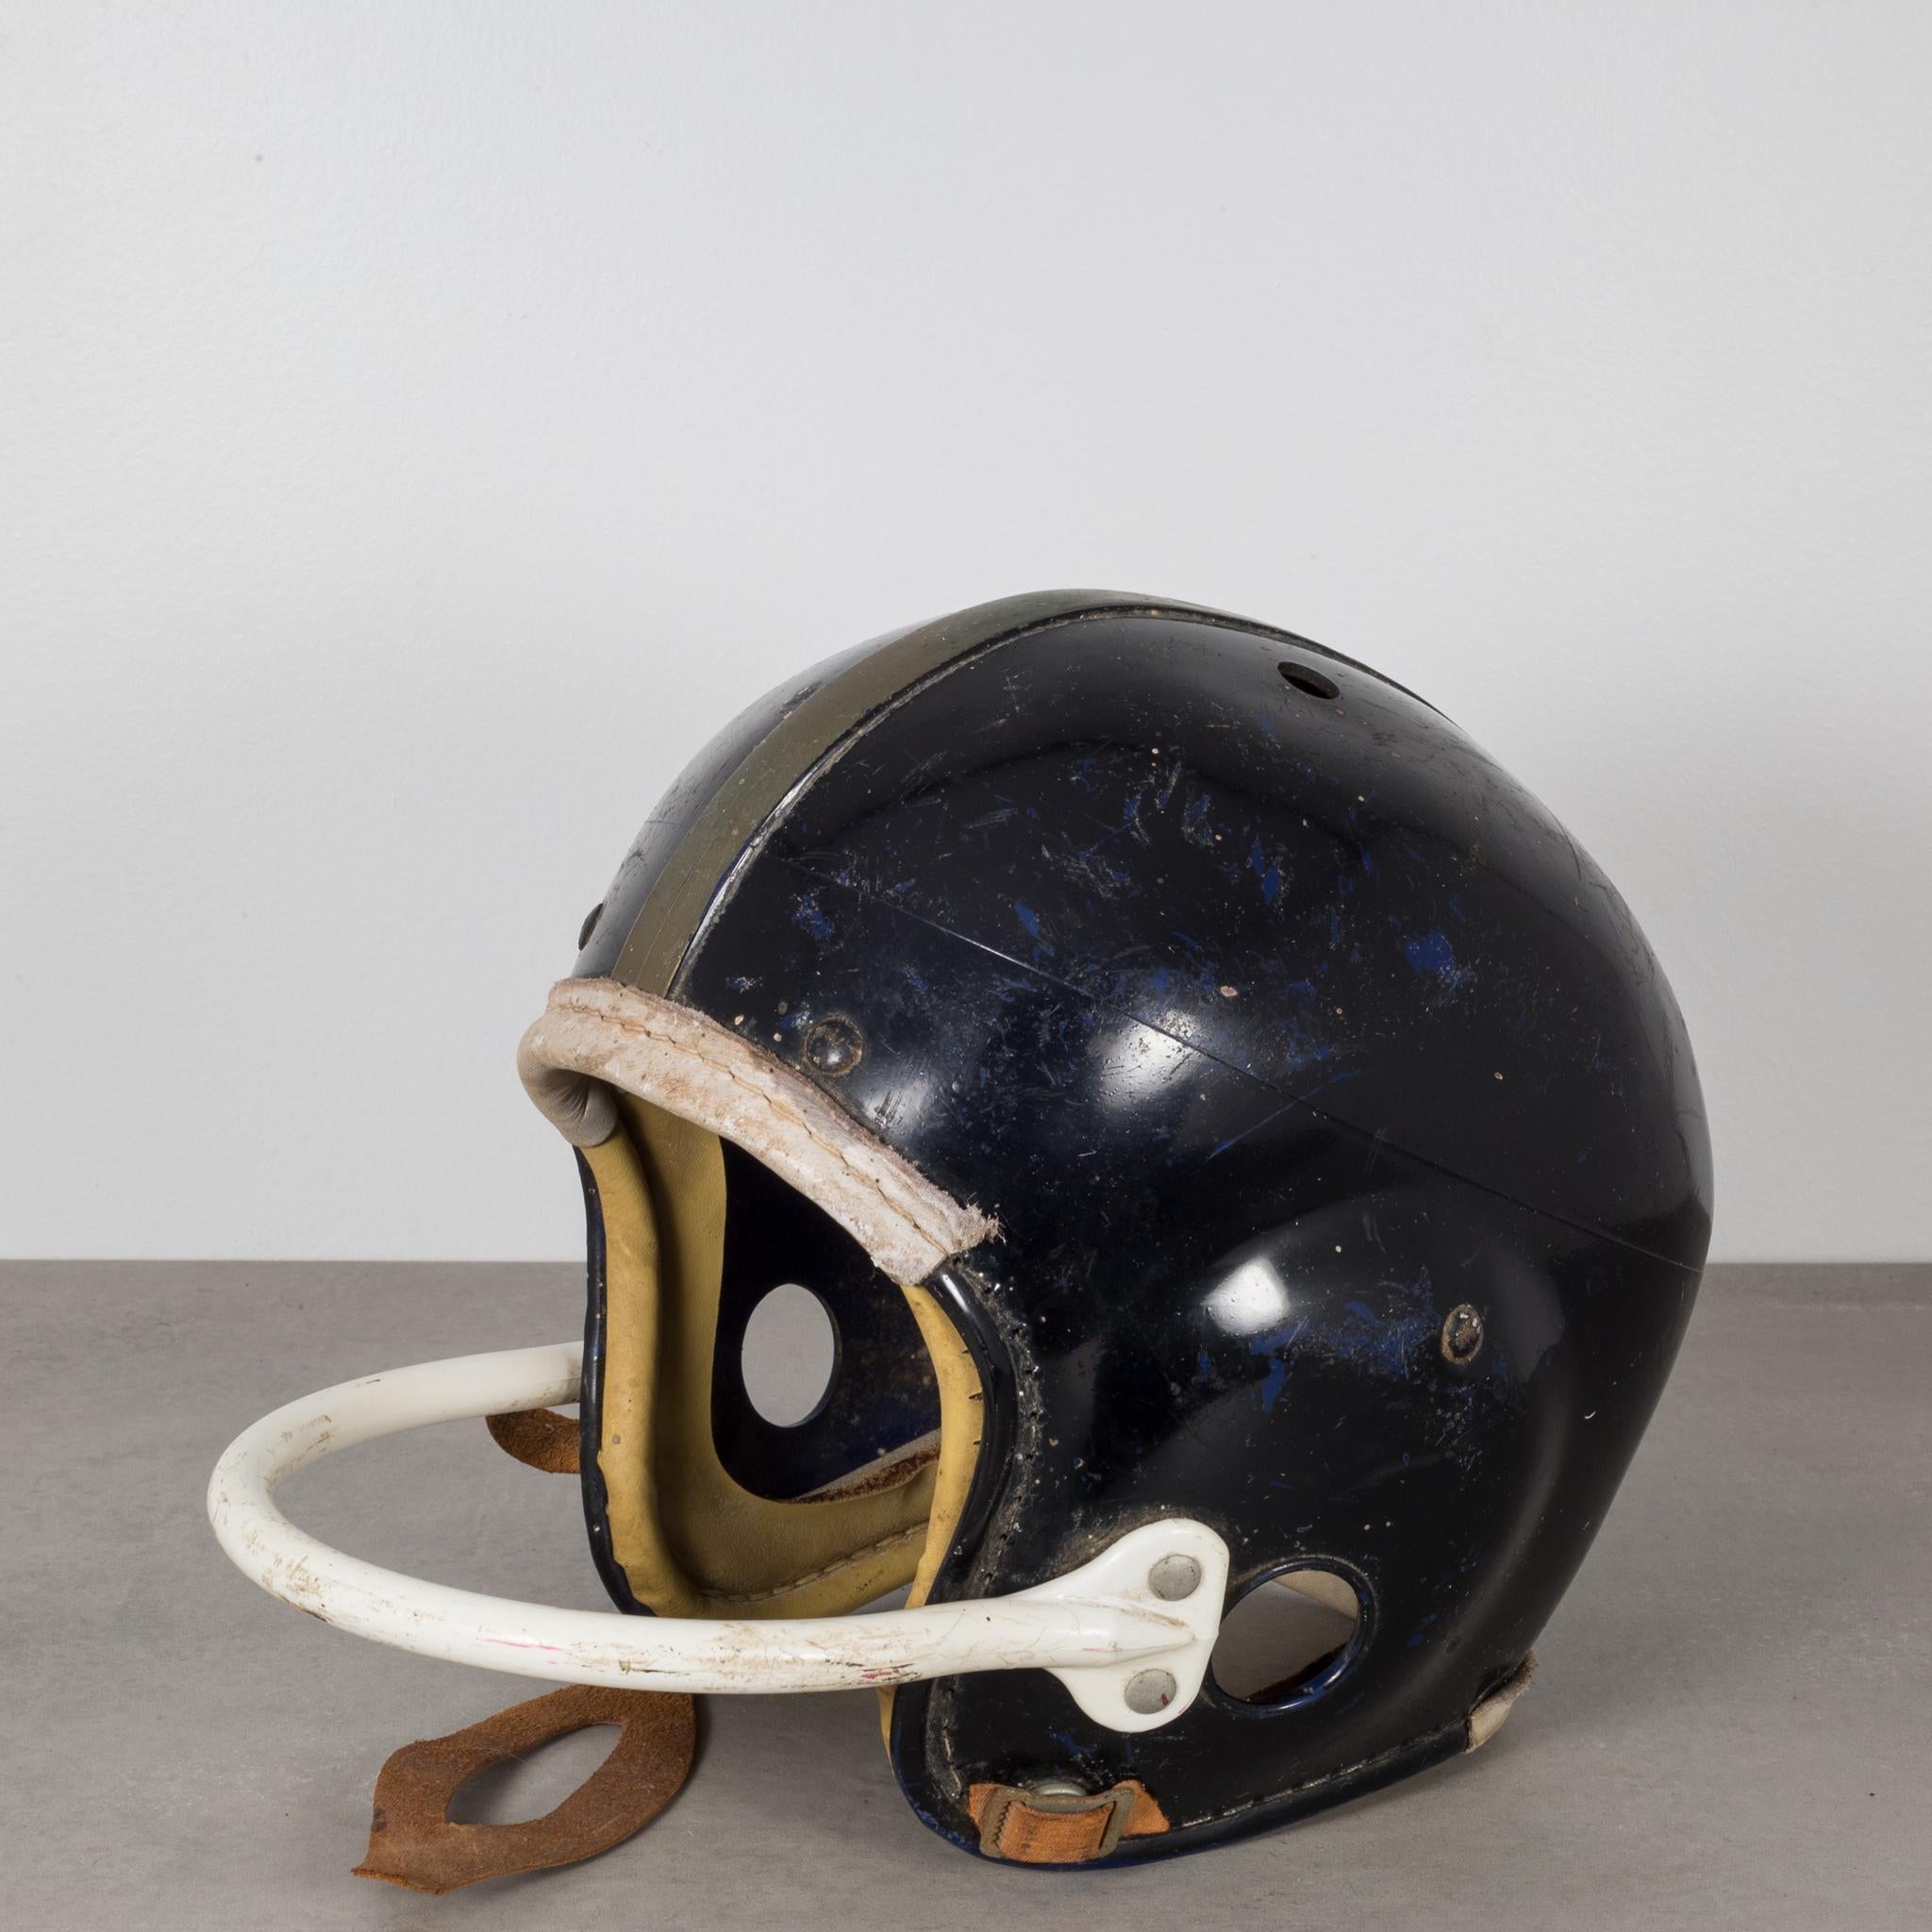 About
An original vintage football helmet with a single bar face mask. The helmet is black with a gold stripe running down the center, white face bar, leather chinstrap and leather cushion on the forehead and back of the head. There is a 